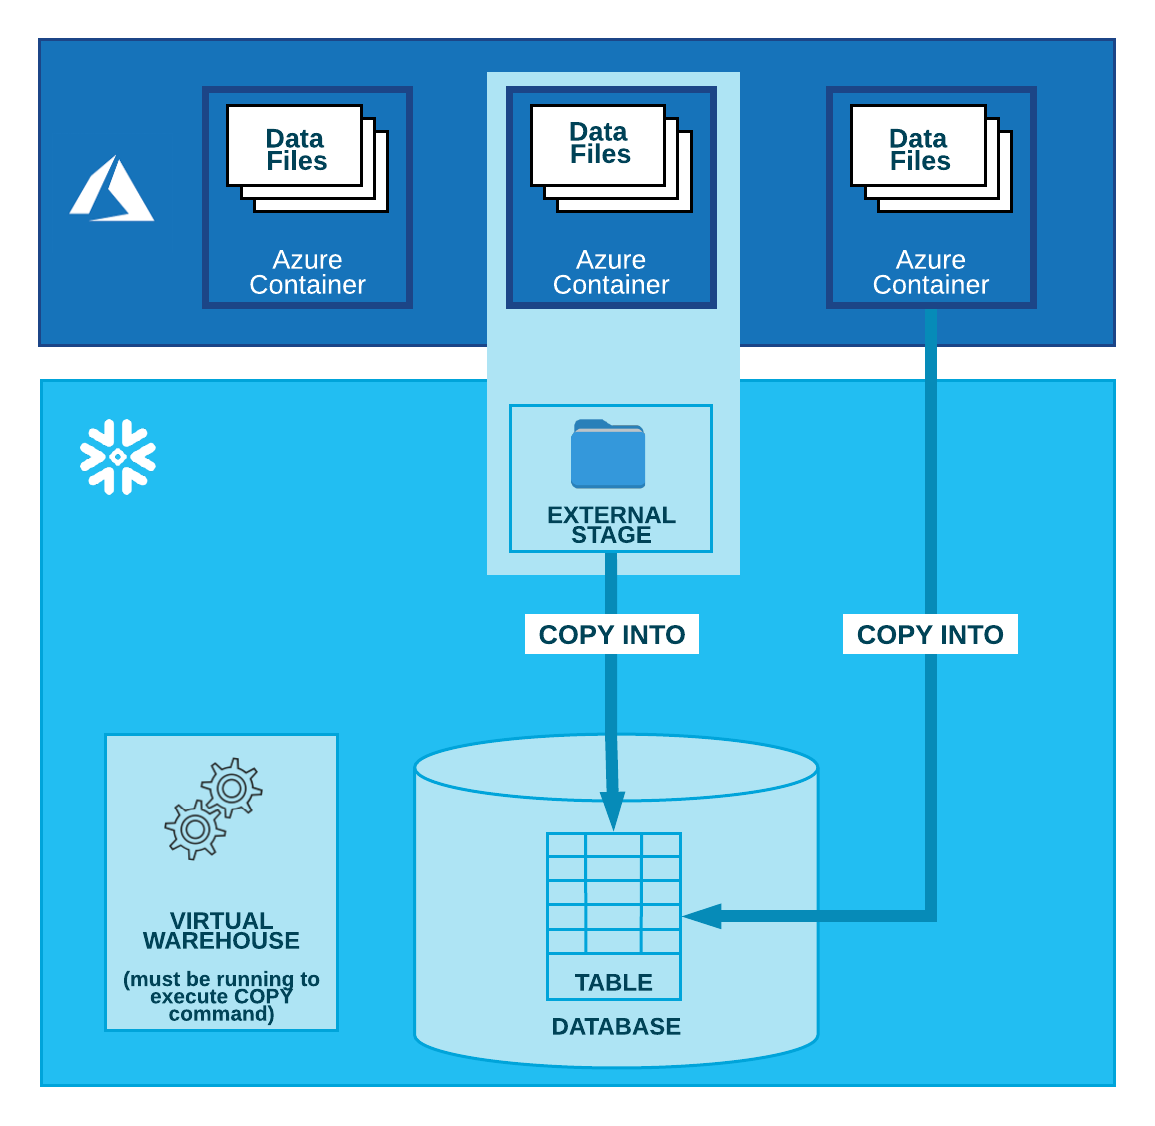 Azure Blob Storage to Snowflake: How data moves from Azure container into Snowflake table